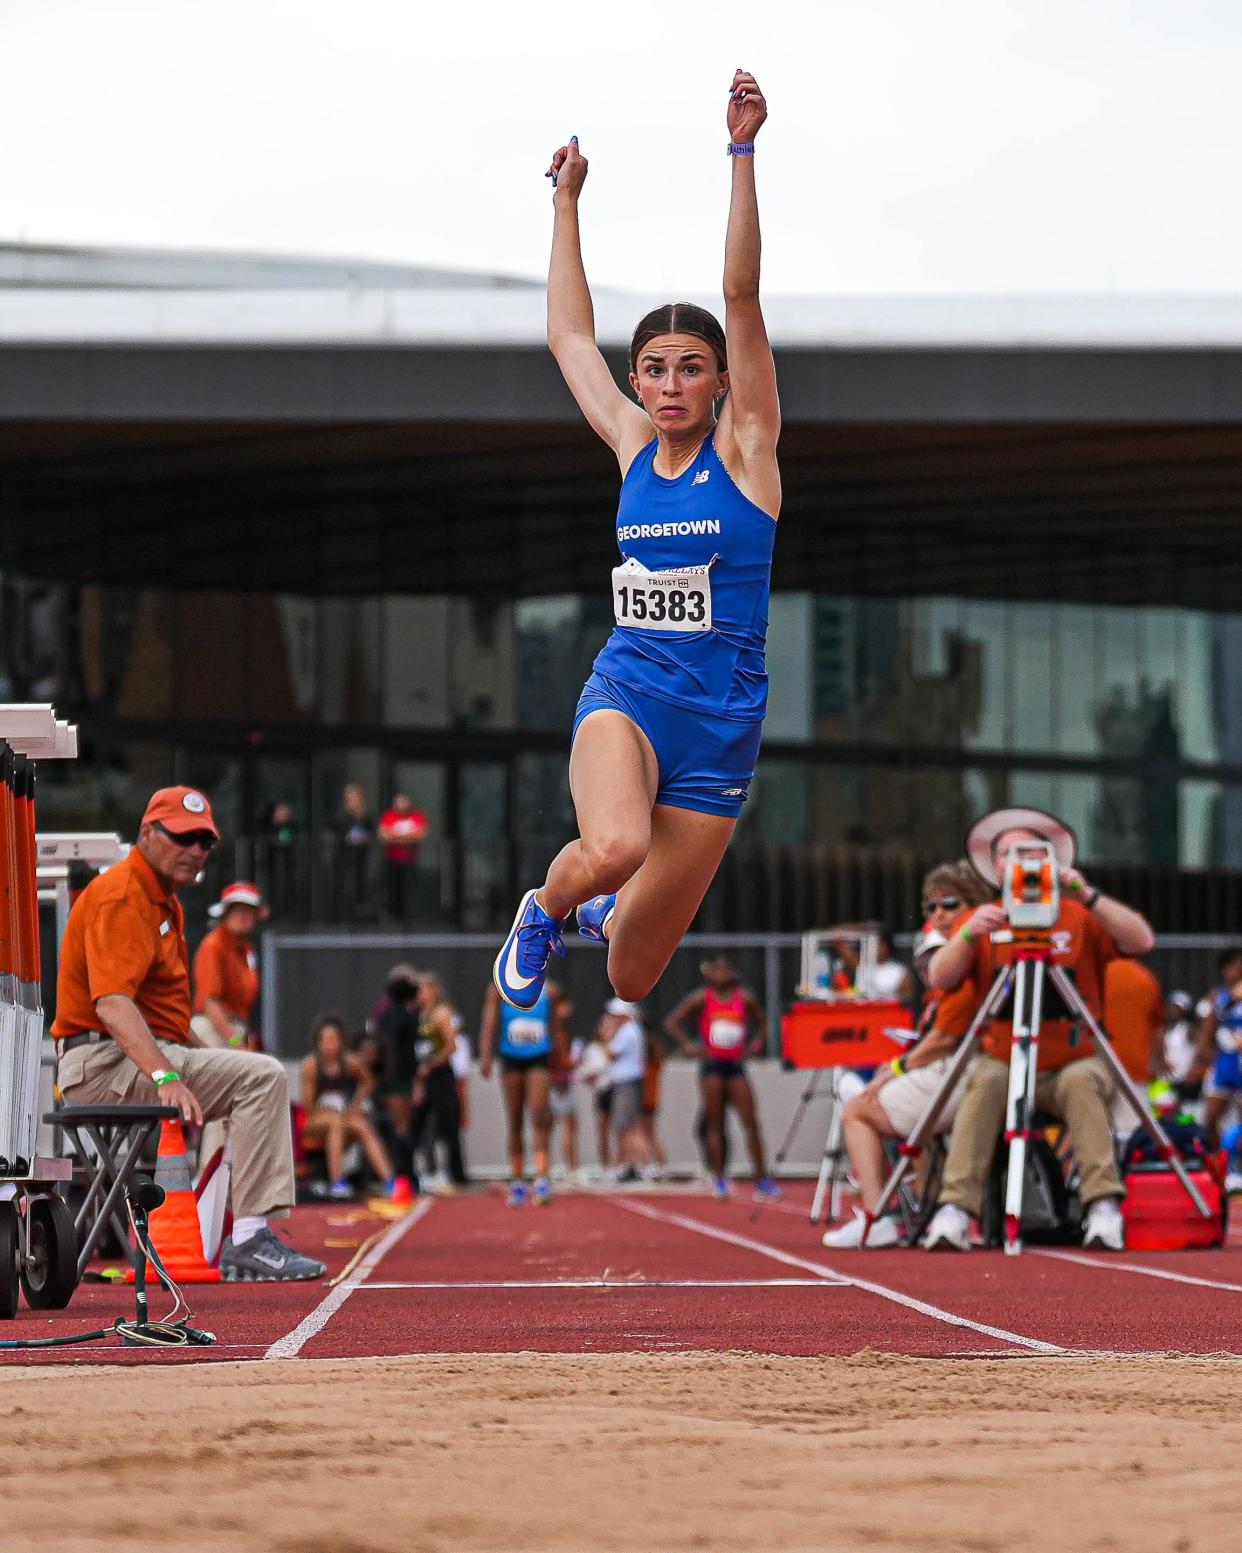 Lily Muzzy of Georgetown won the triple jump at the UIL state meet on Friday with a leap of 41-6.25.